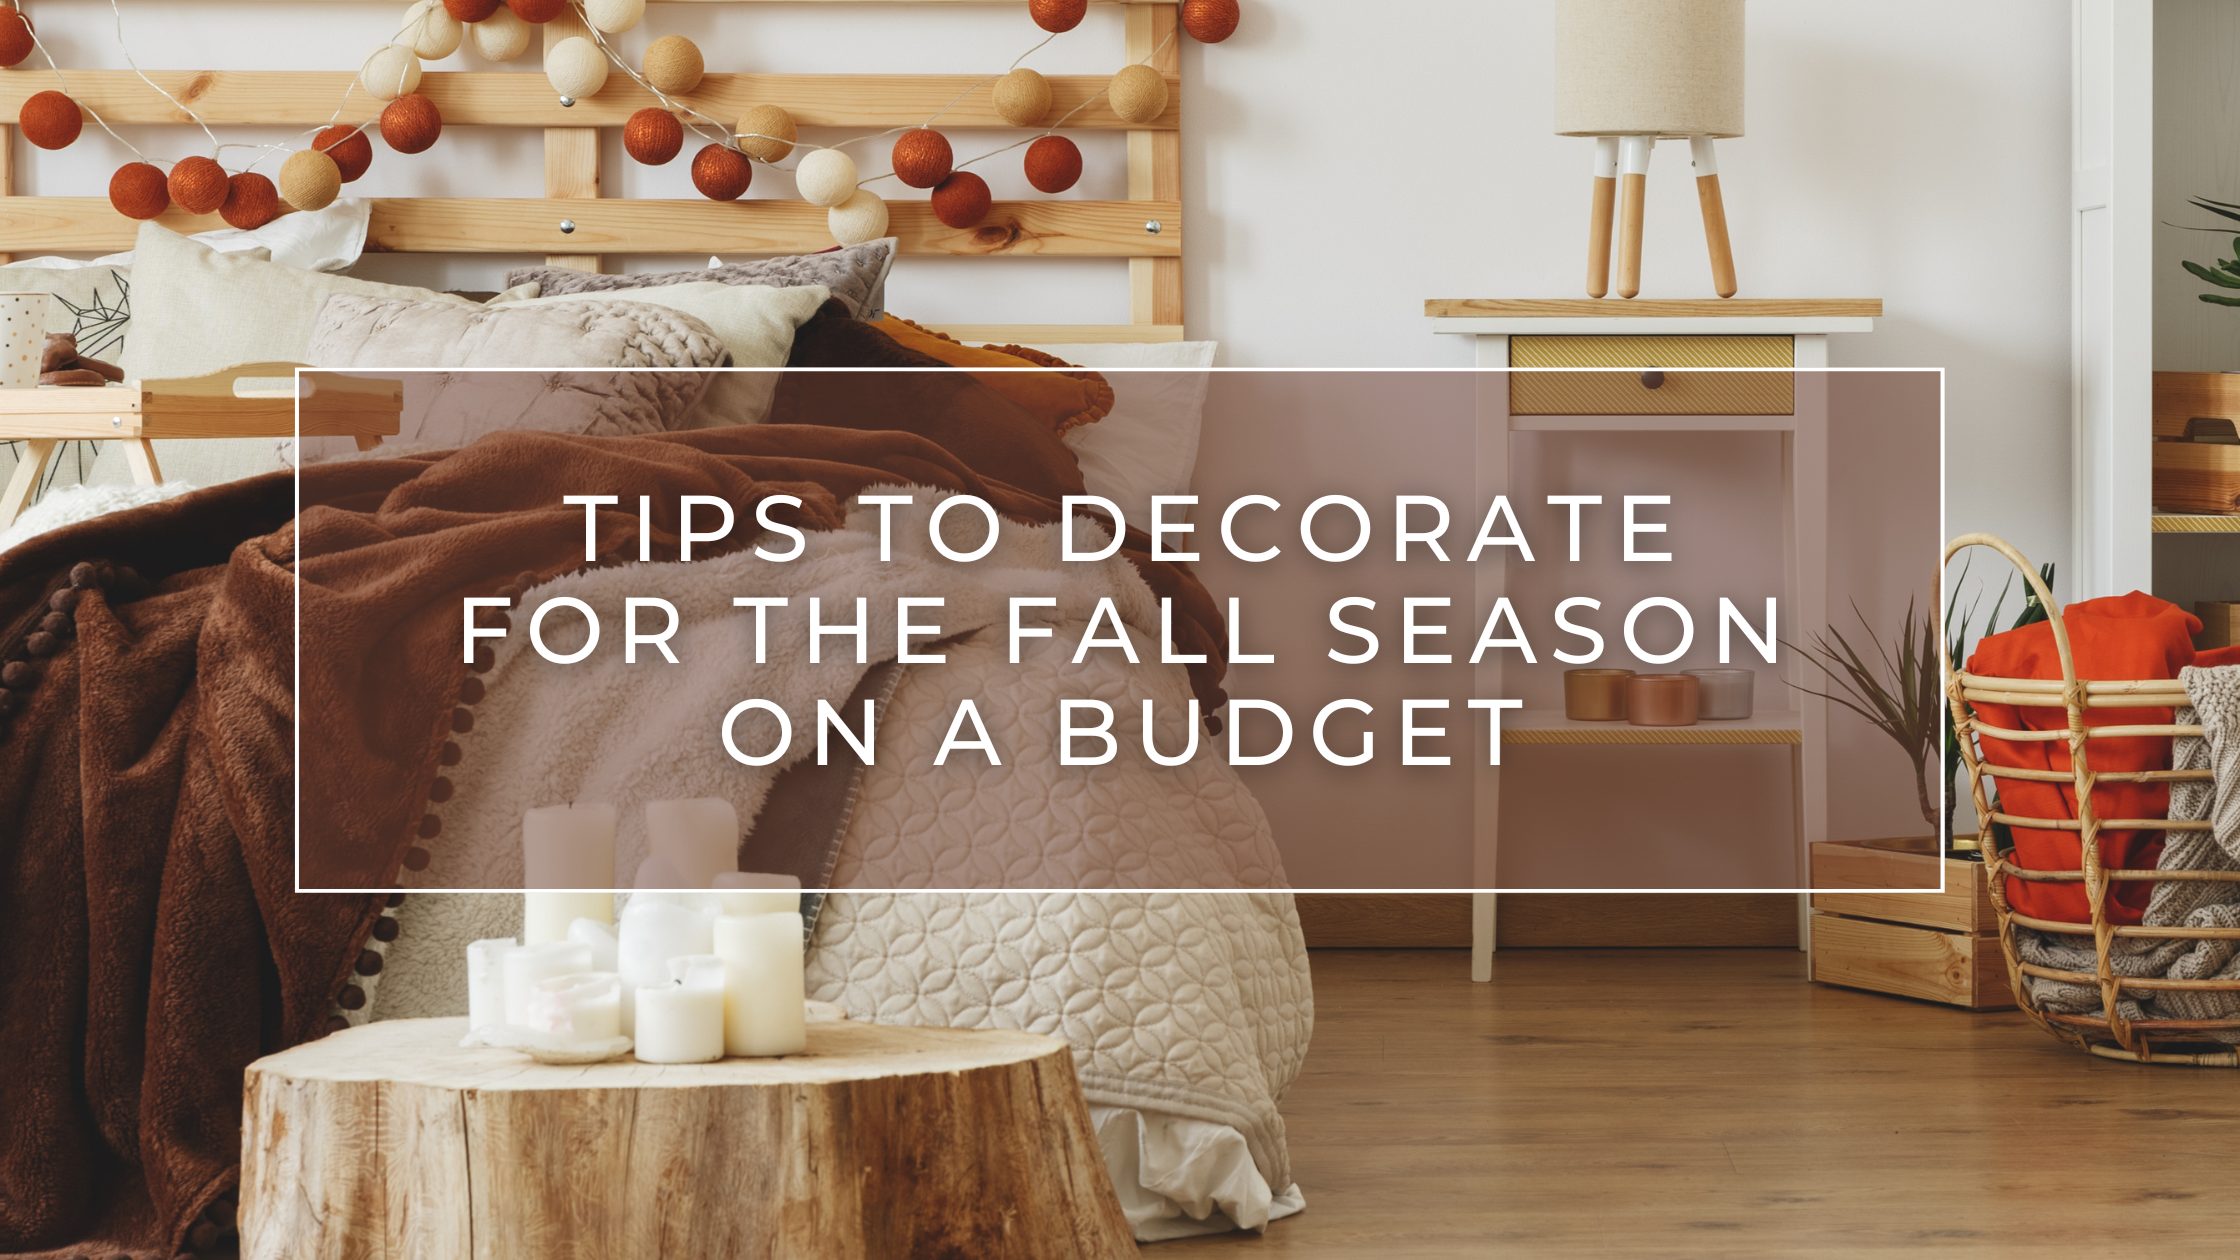 Tips to decorate for the fall season on a budget